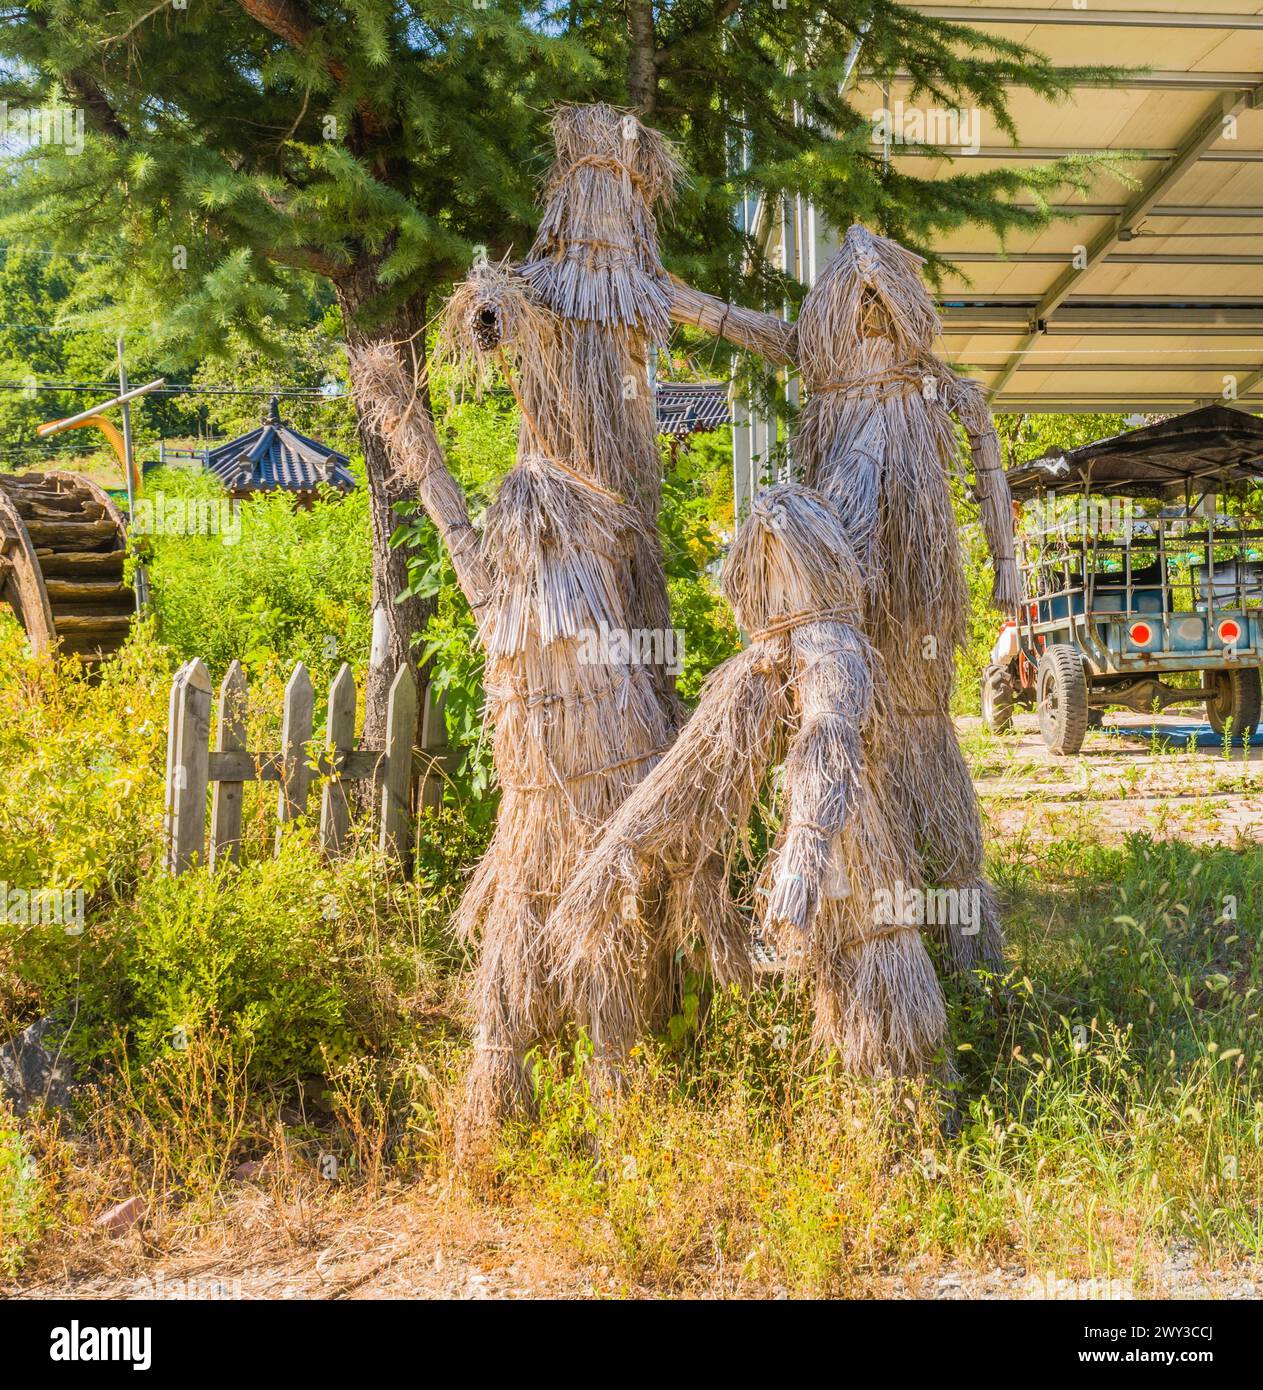 Family of people made out of straw and rope standing under pine tree on sunny day in rural community in South Korea Stock Photo